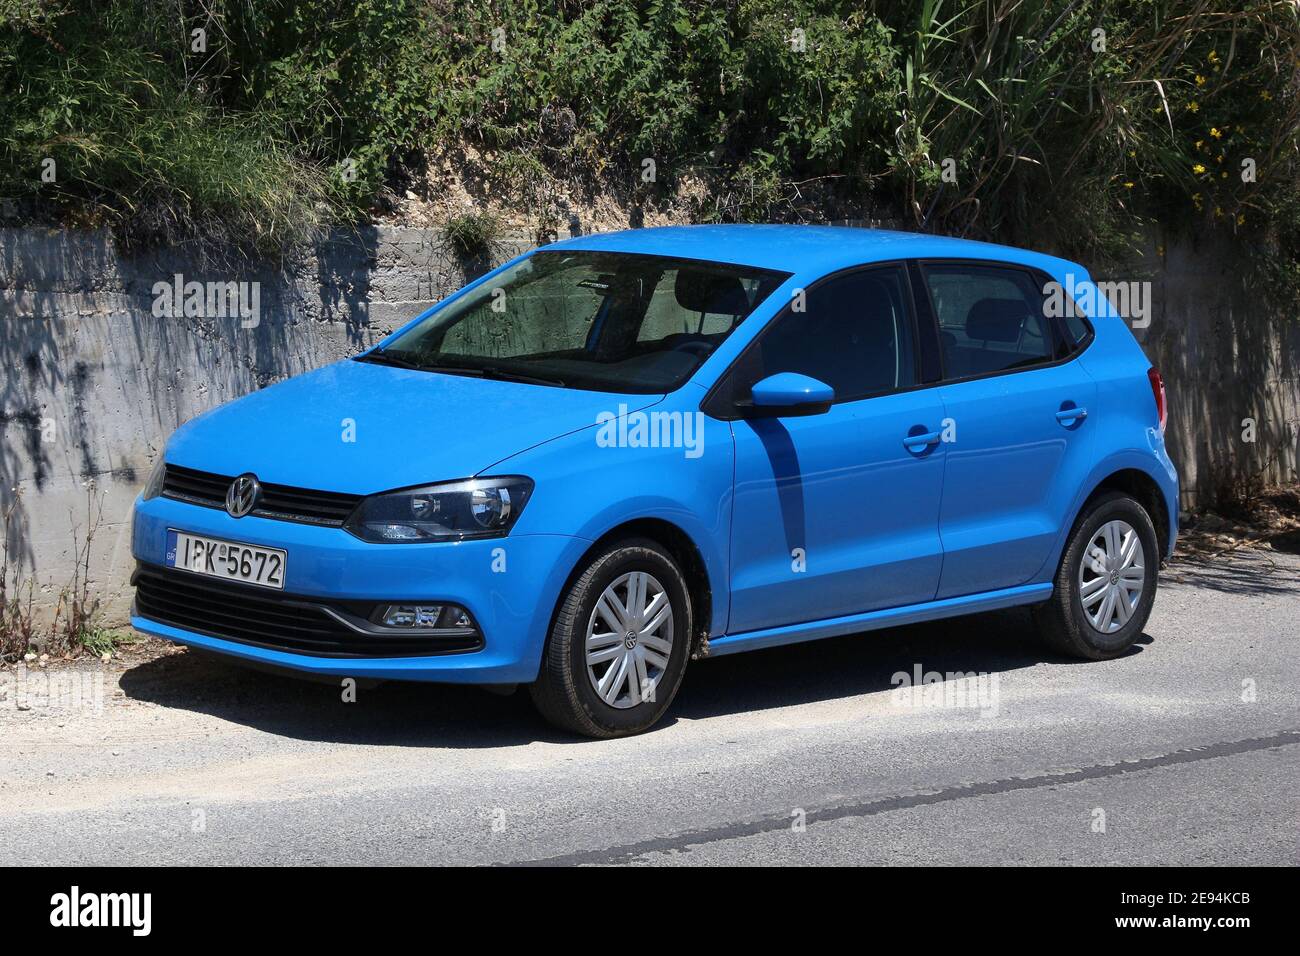 Vw Polo High Resolution Stock Photography and Images - Alamy